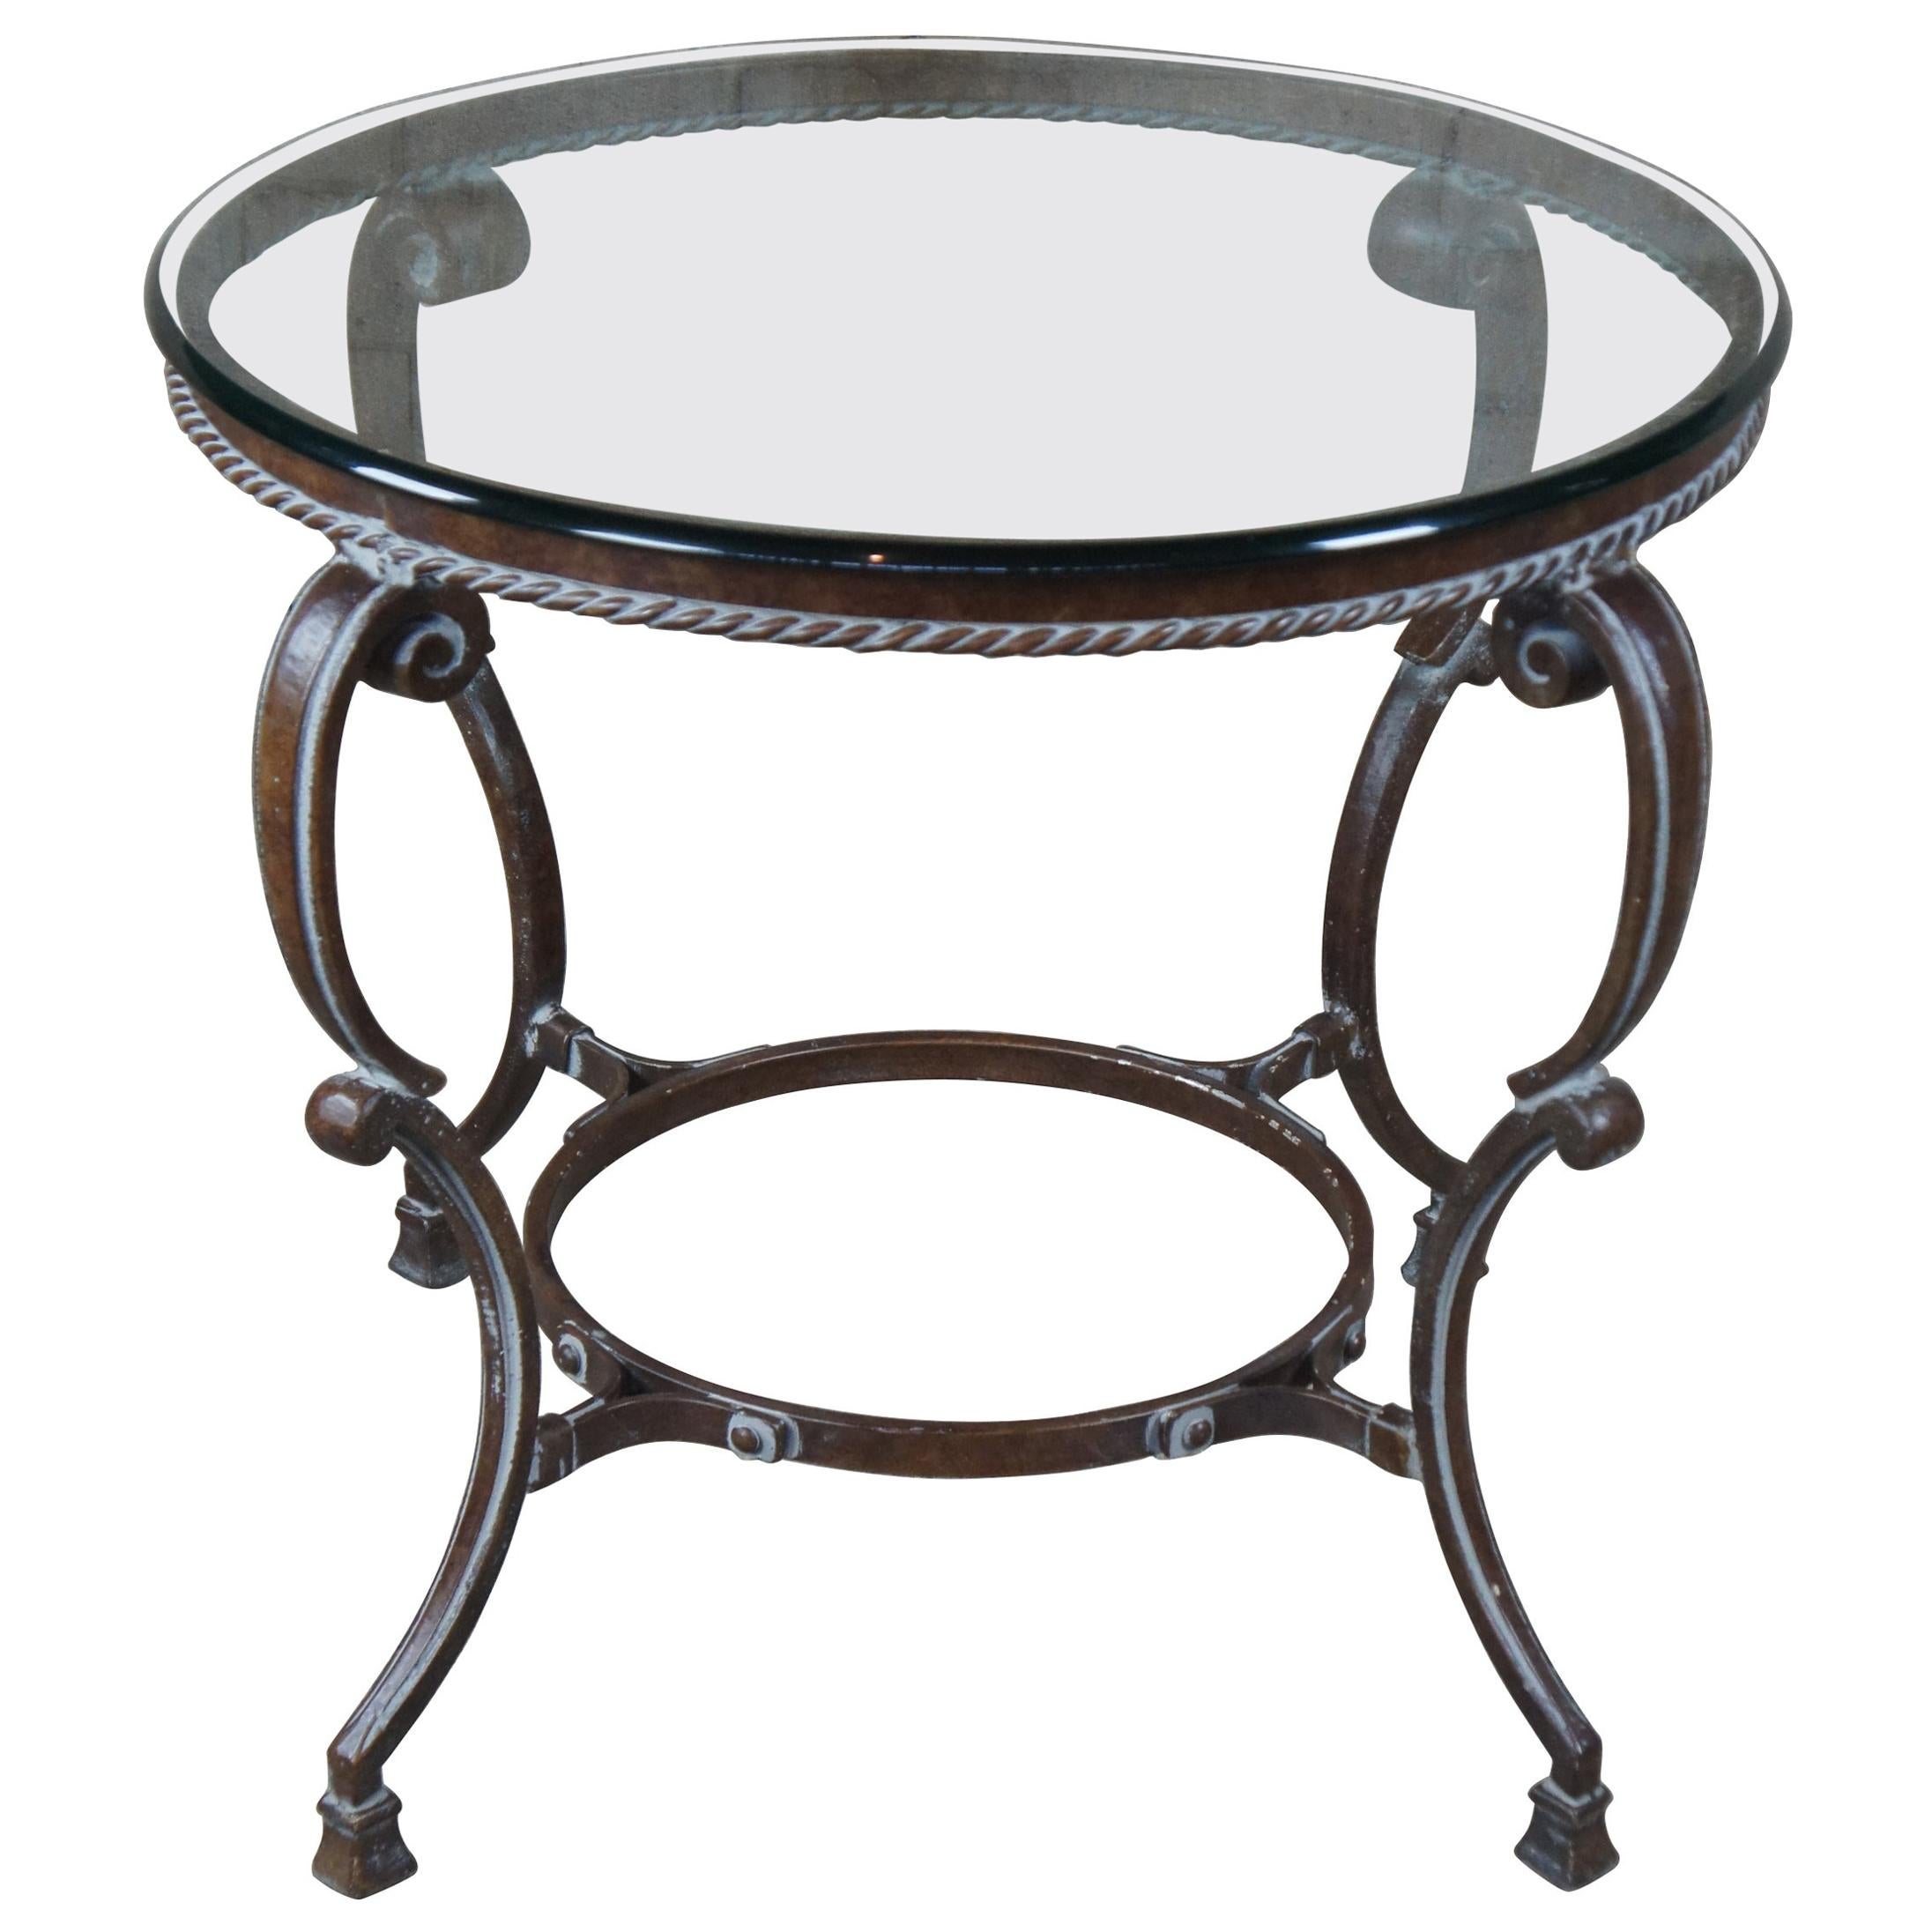 Art De Mexico Round Iron And Glass, Round Decorative Table With Glass Top